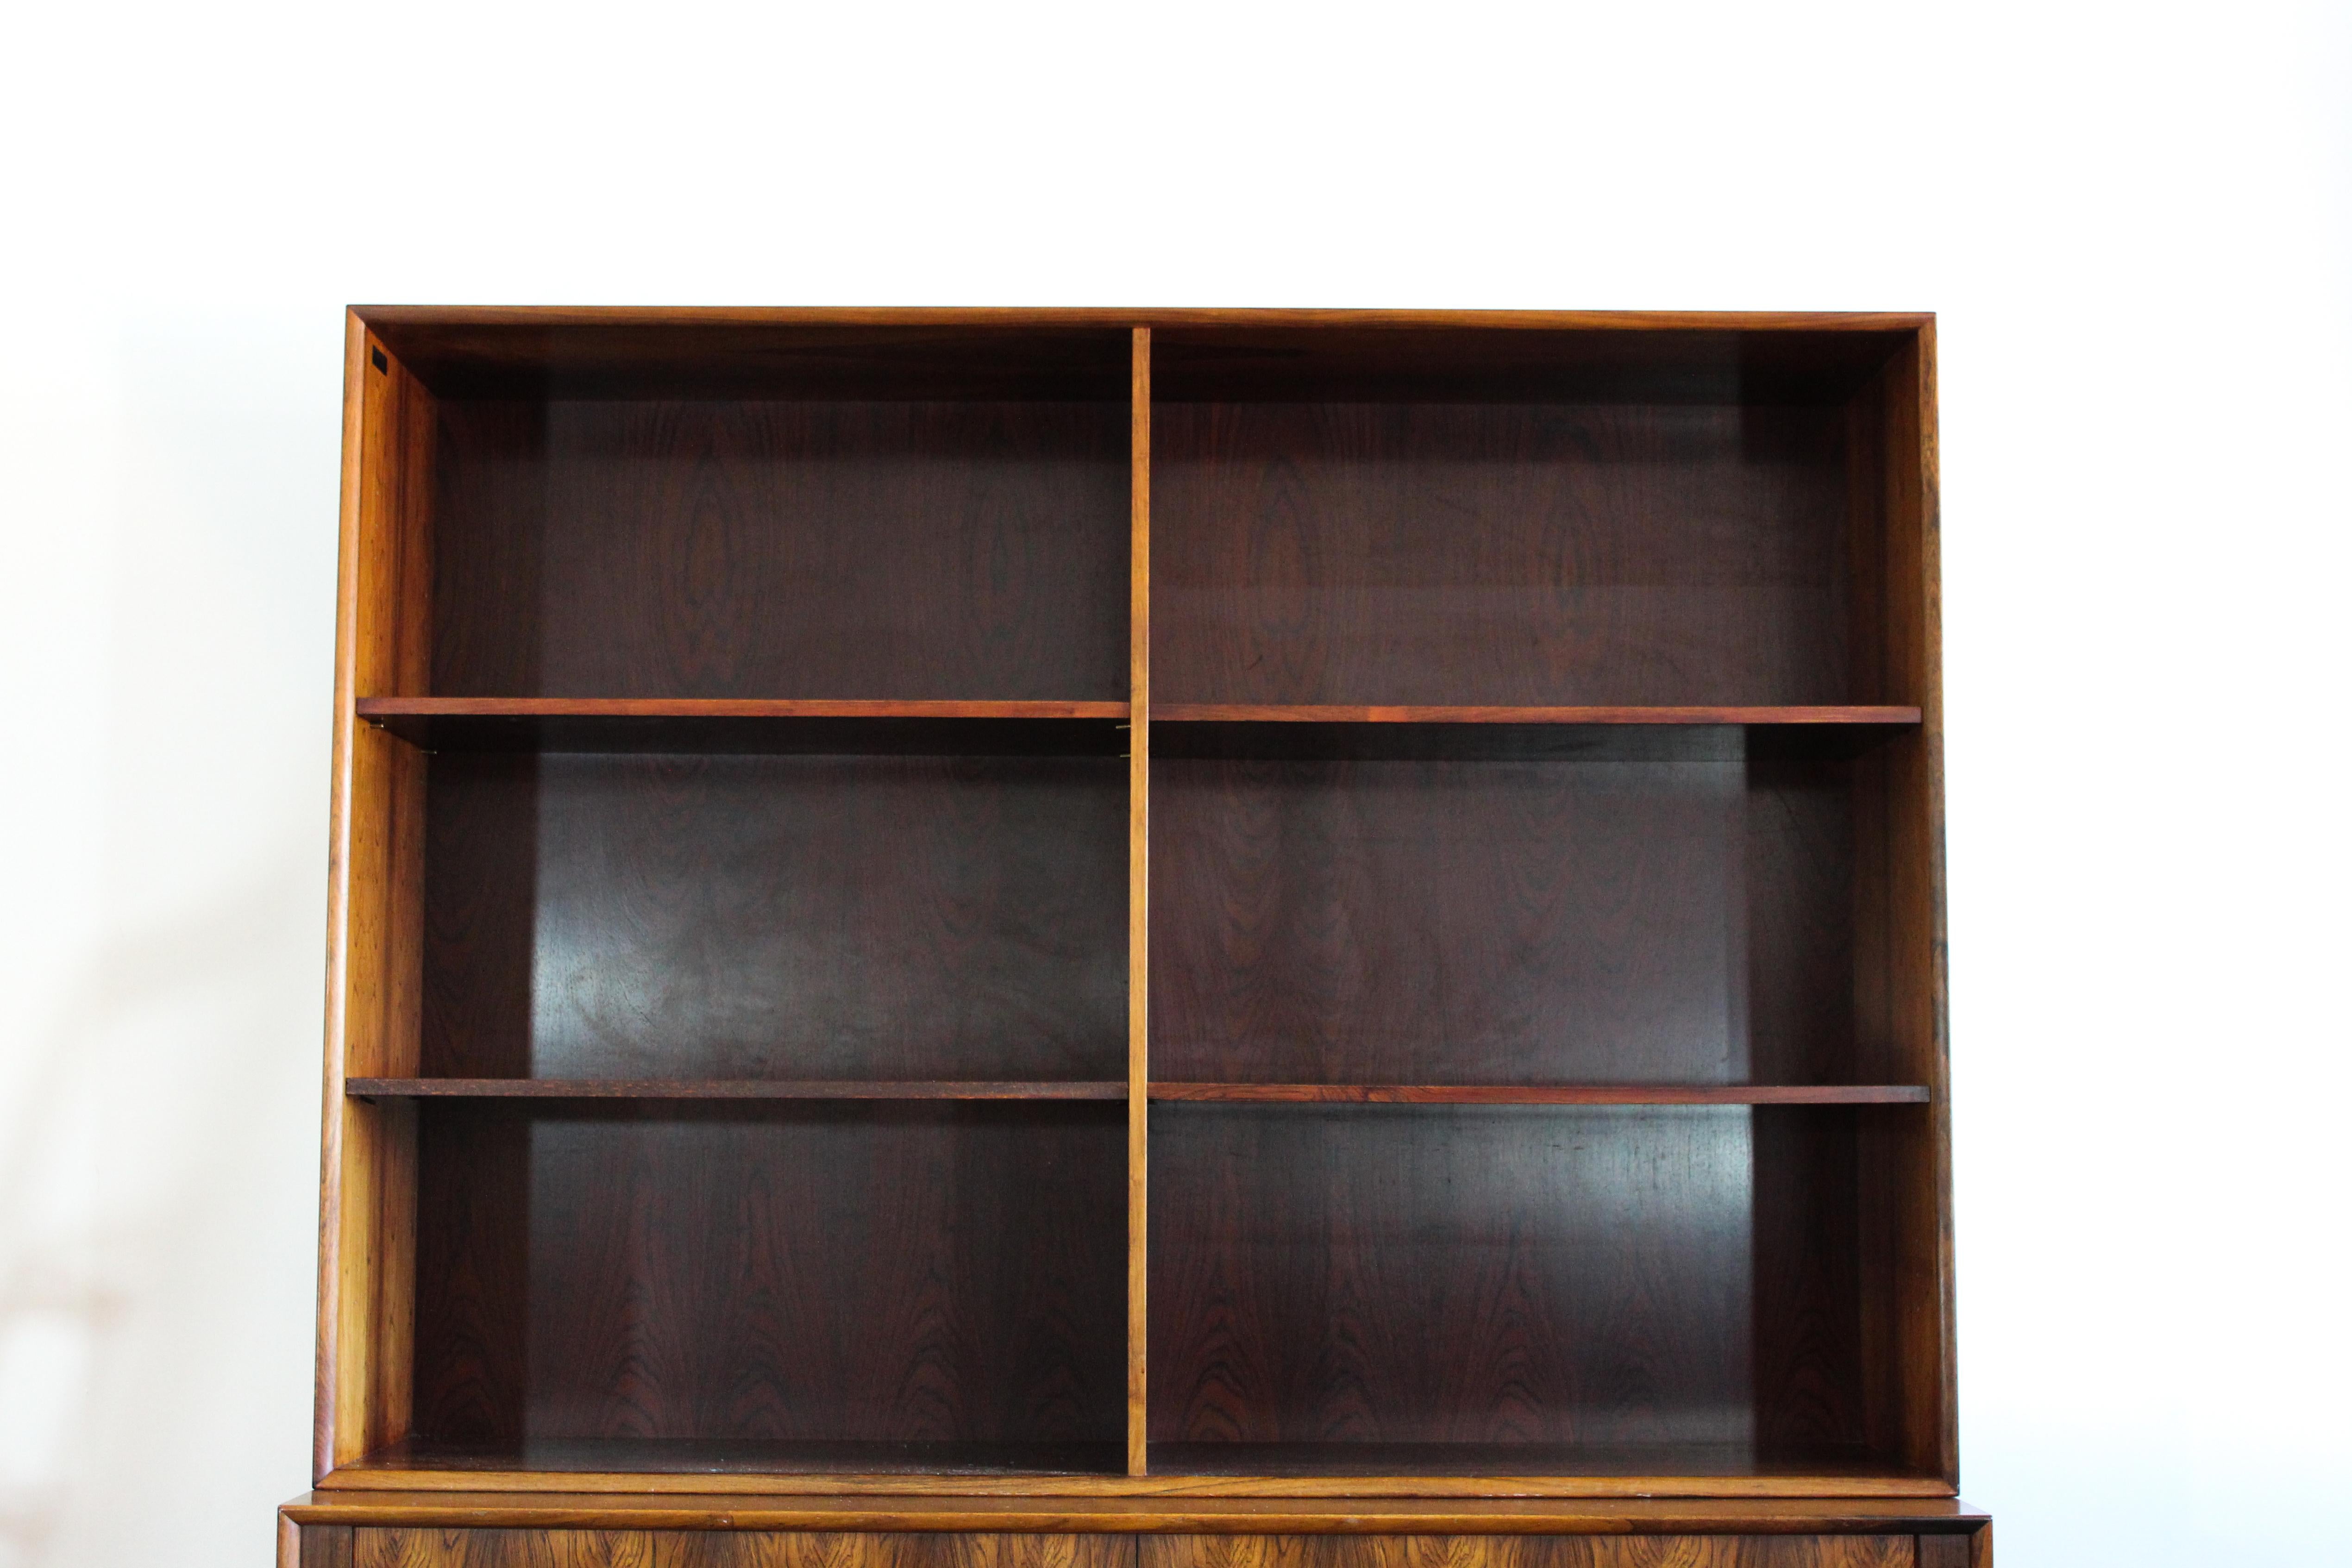 Danish Midcentury Rosewood Arne Vodder Book Case with Tambour Doors by Sibast, 1950s For Sale